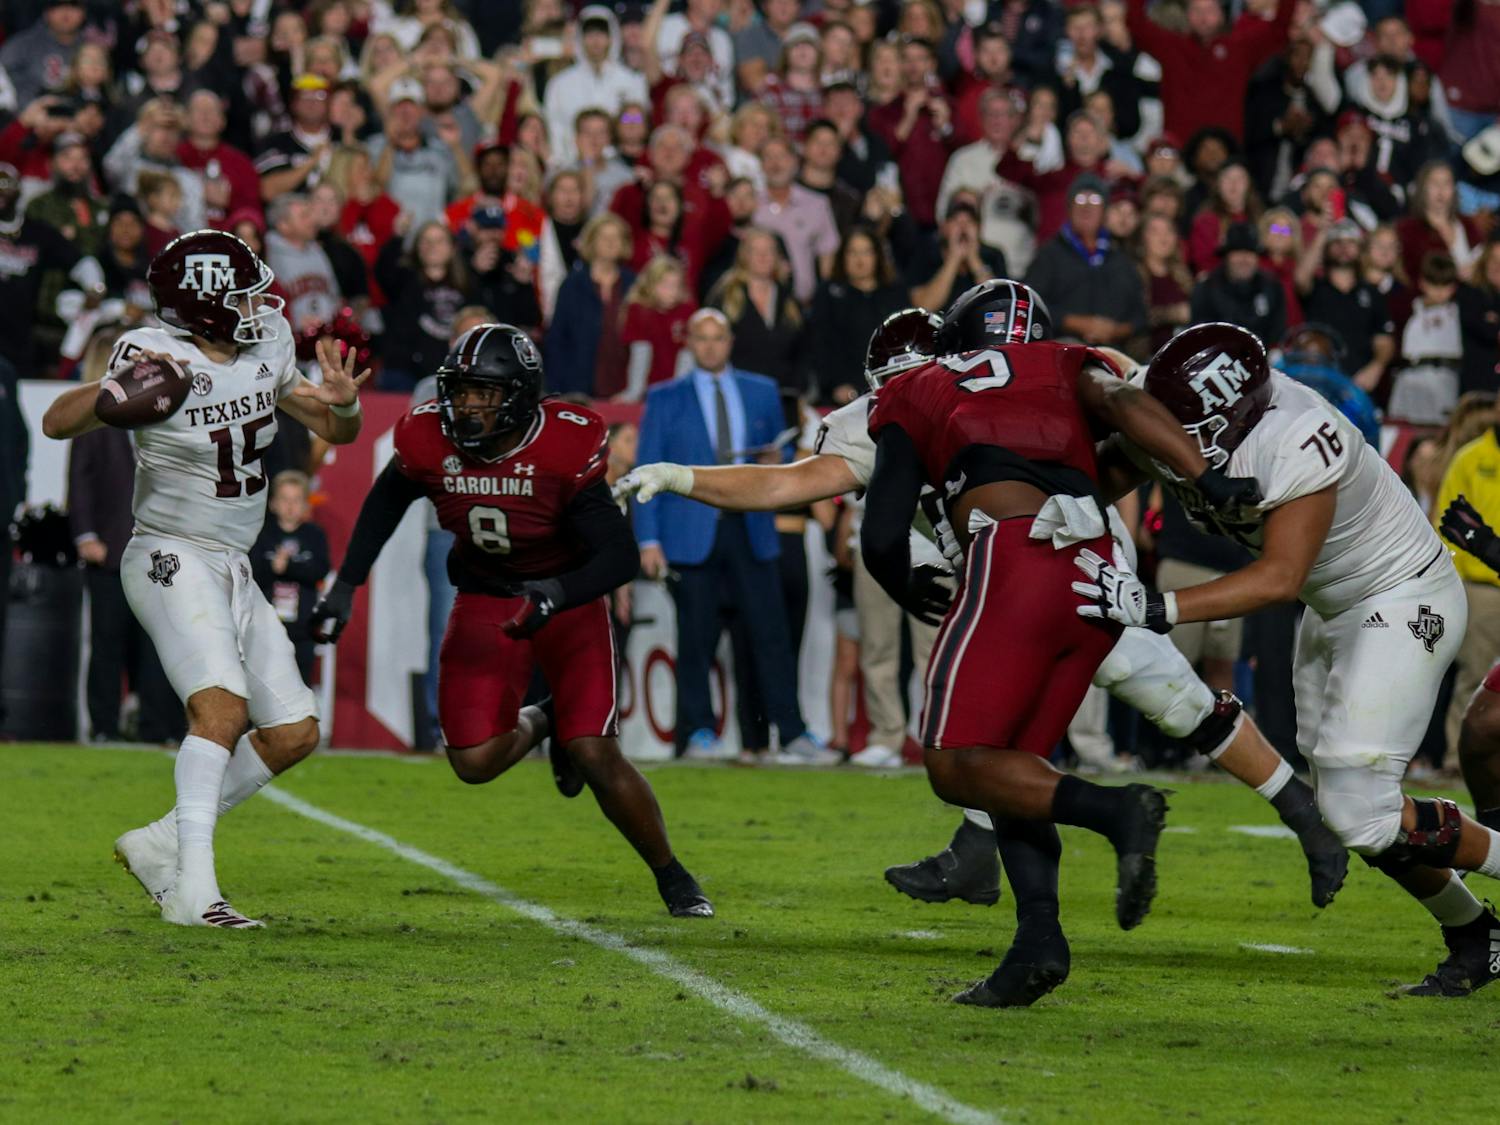 Redshirt sophomore edge Gilber Edmond rushes the quarterback for the Texas A&amp;M Aggies during the fourth quarter at Williams-Brice Stadium on Oct. 22, 2022. &nbsp;South Carolina defeated Texas A&amp;M 30-24.